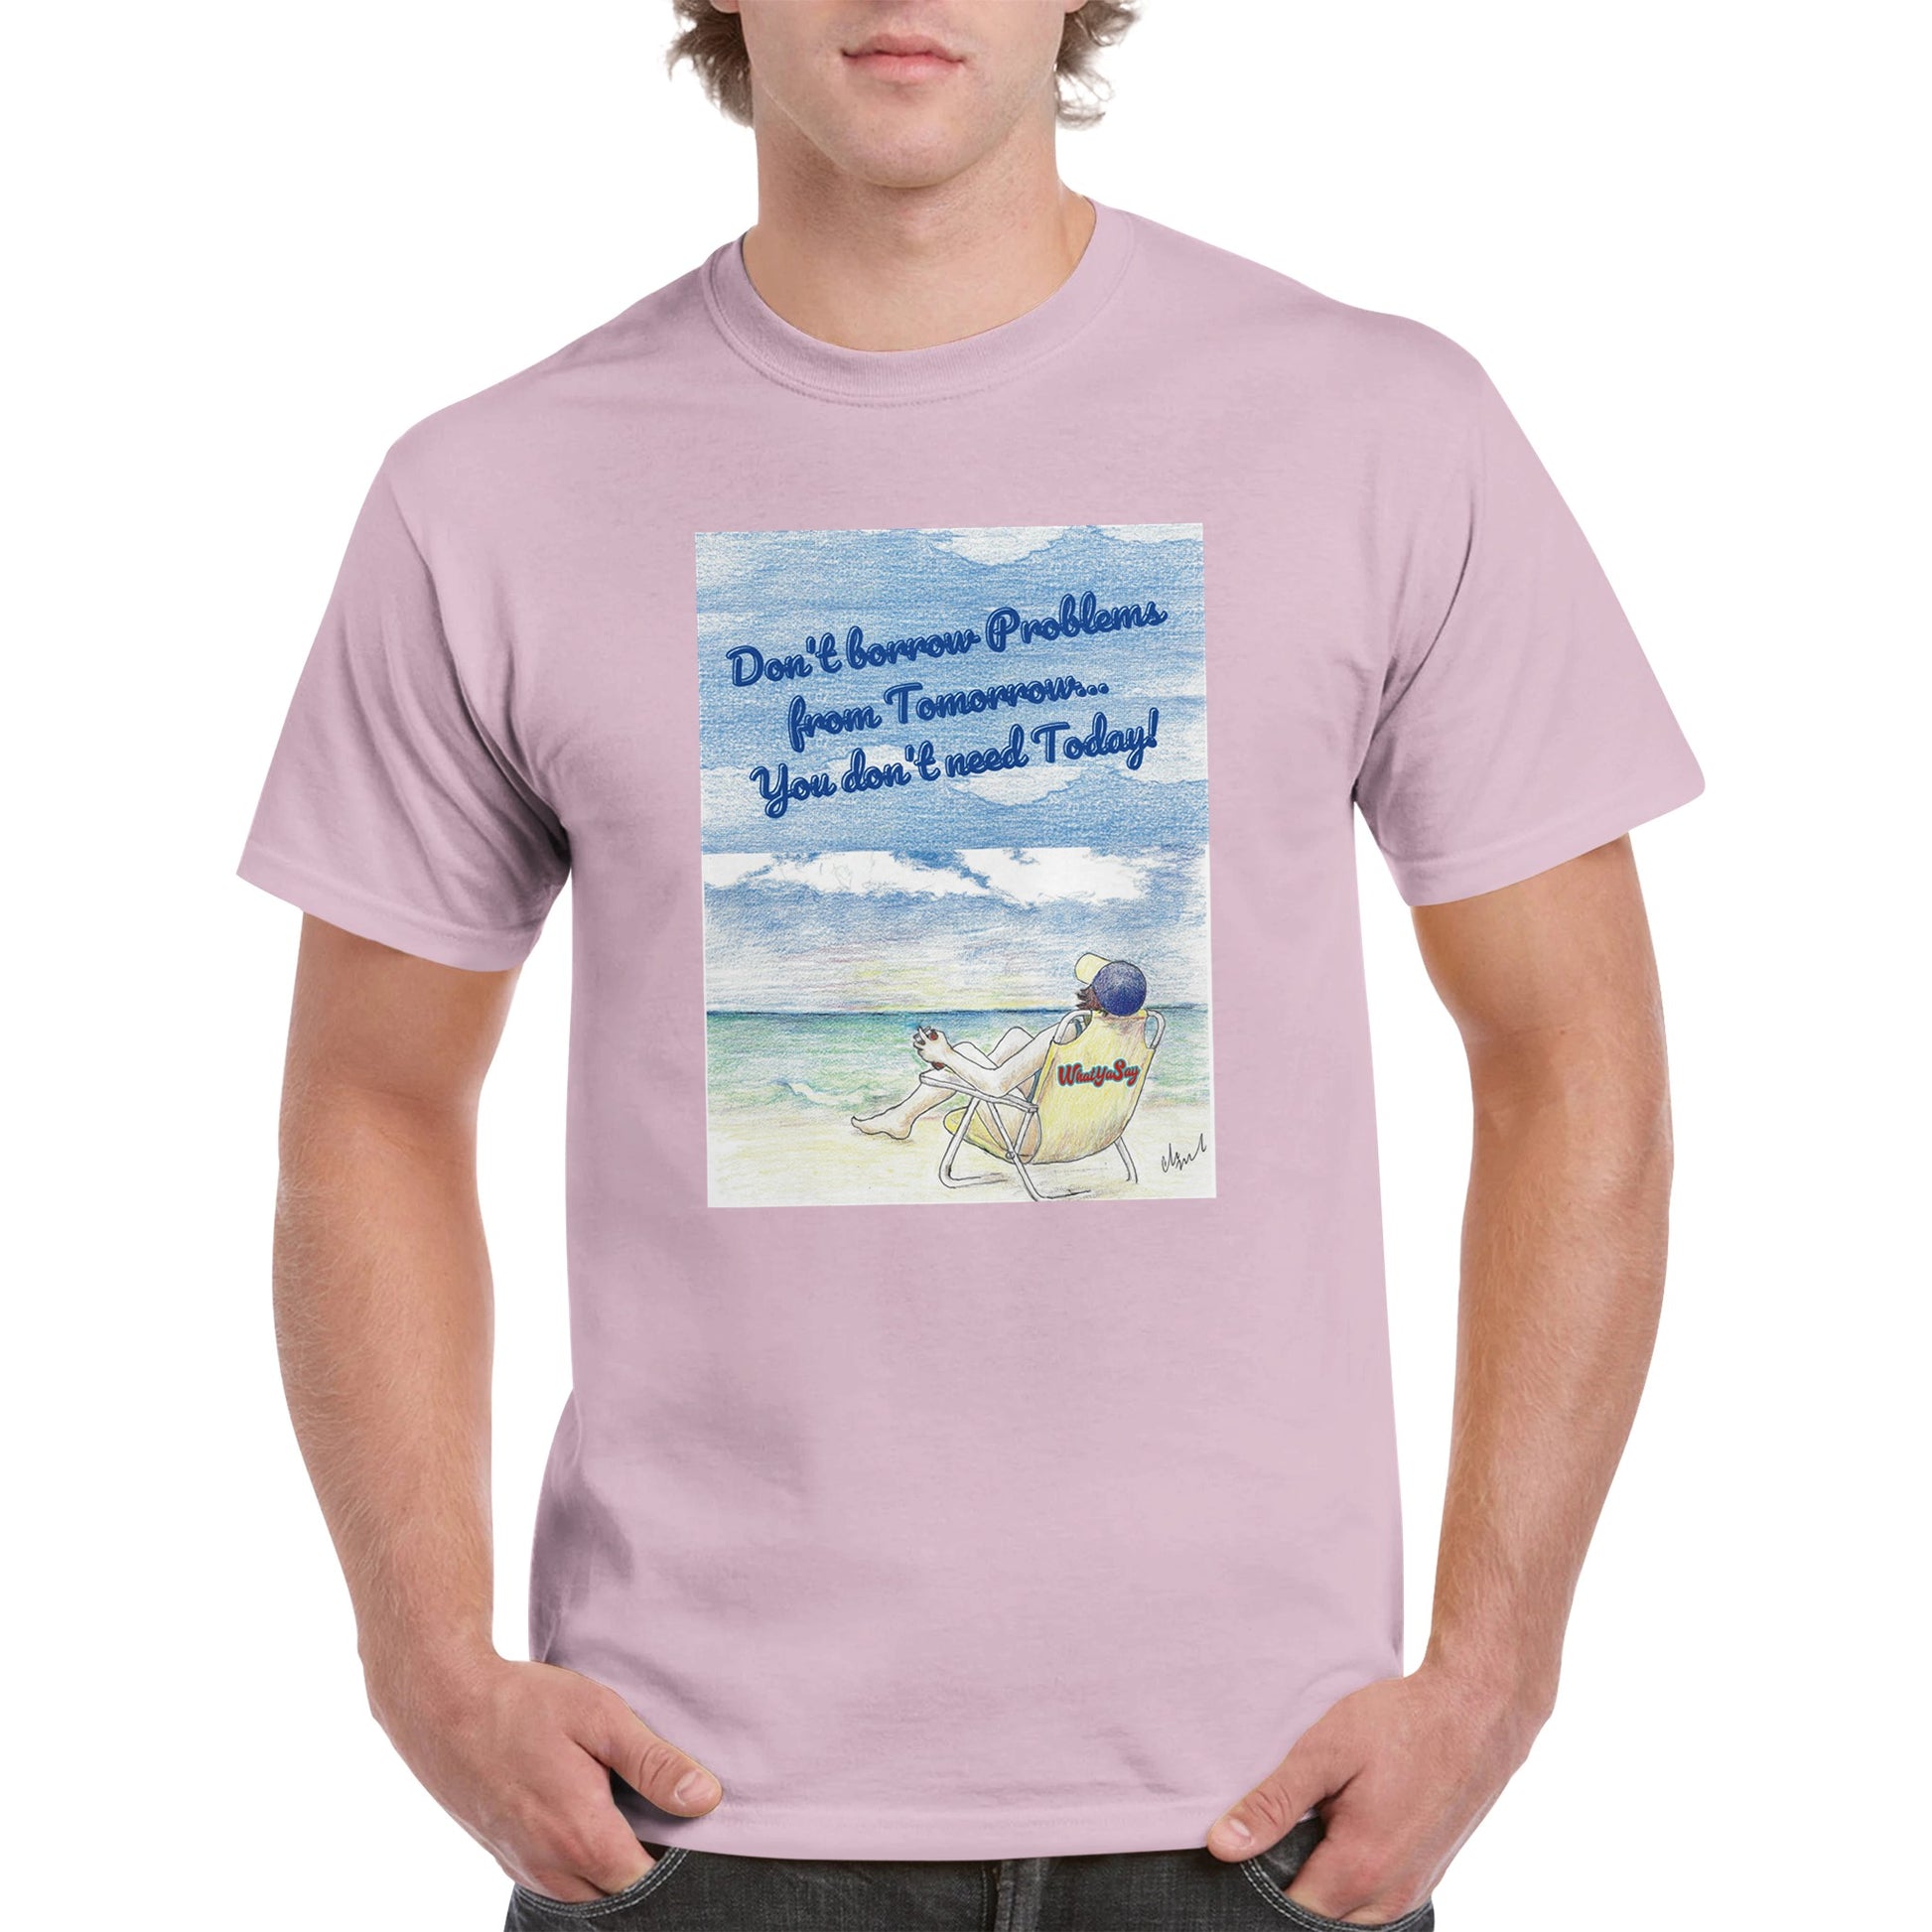 A light pink heavyweight Unisex Crewneck t-shirt with original artwork and motto Don’t borrow Problems from Tomorrow… You don’t need Today! on front with WhatYa Say logo on image from WhatYa Say Apparel worn by blonde-haired male front view.